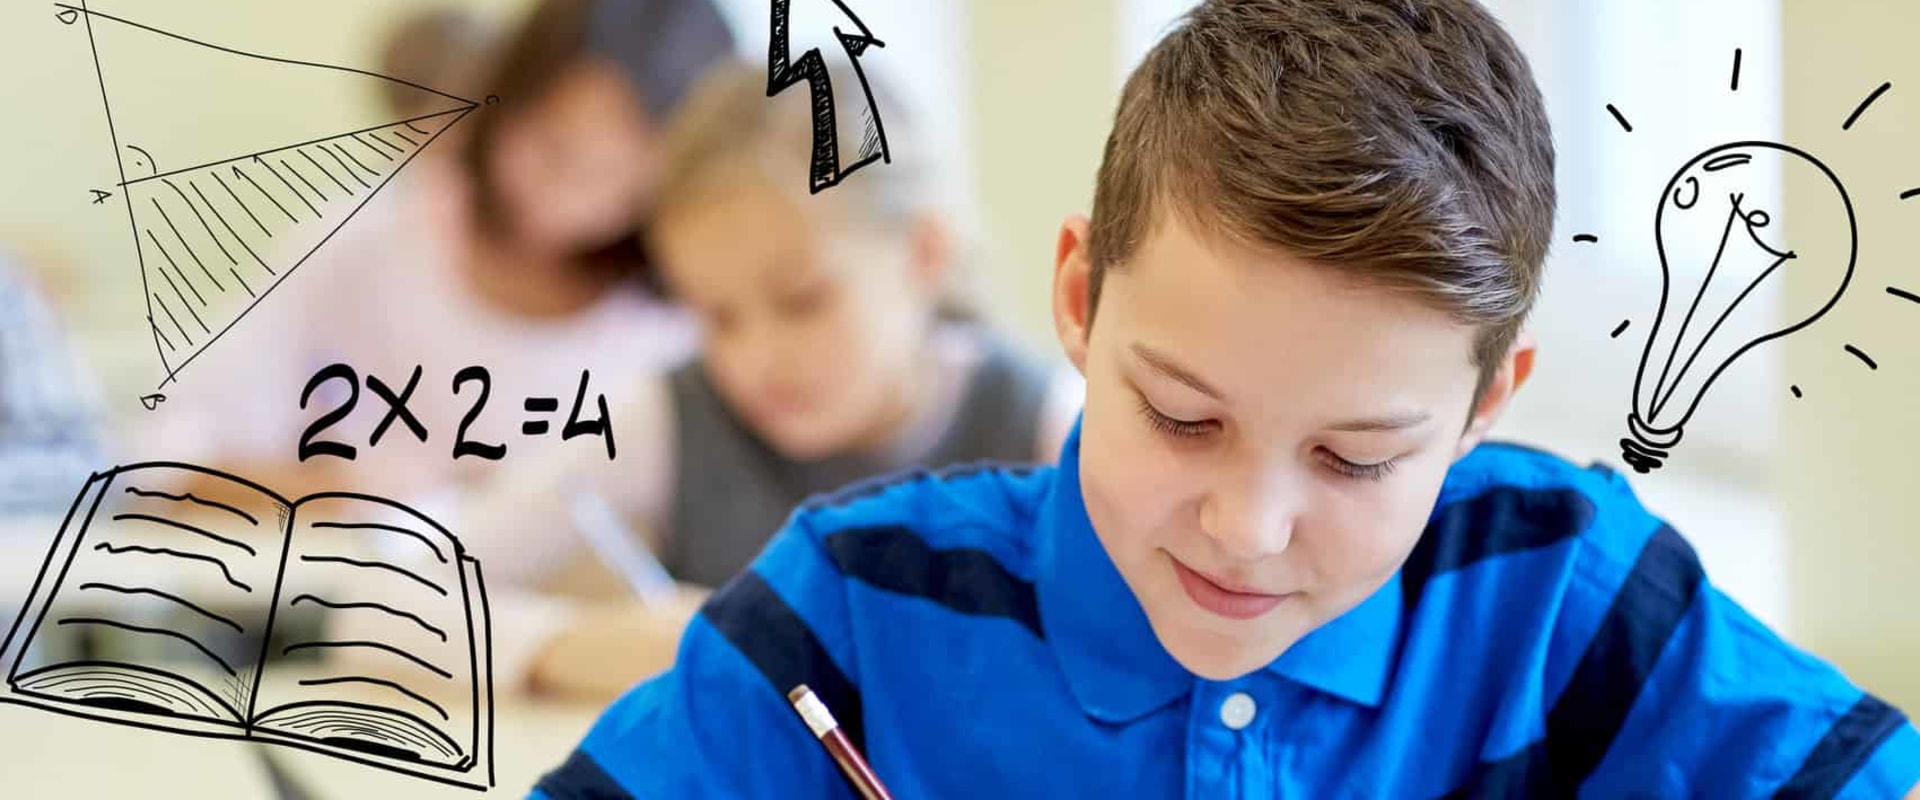 Time Management and Study Skills for Your Child's Academic Success